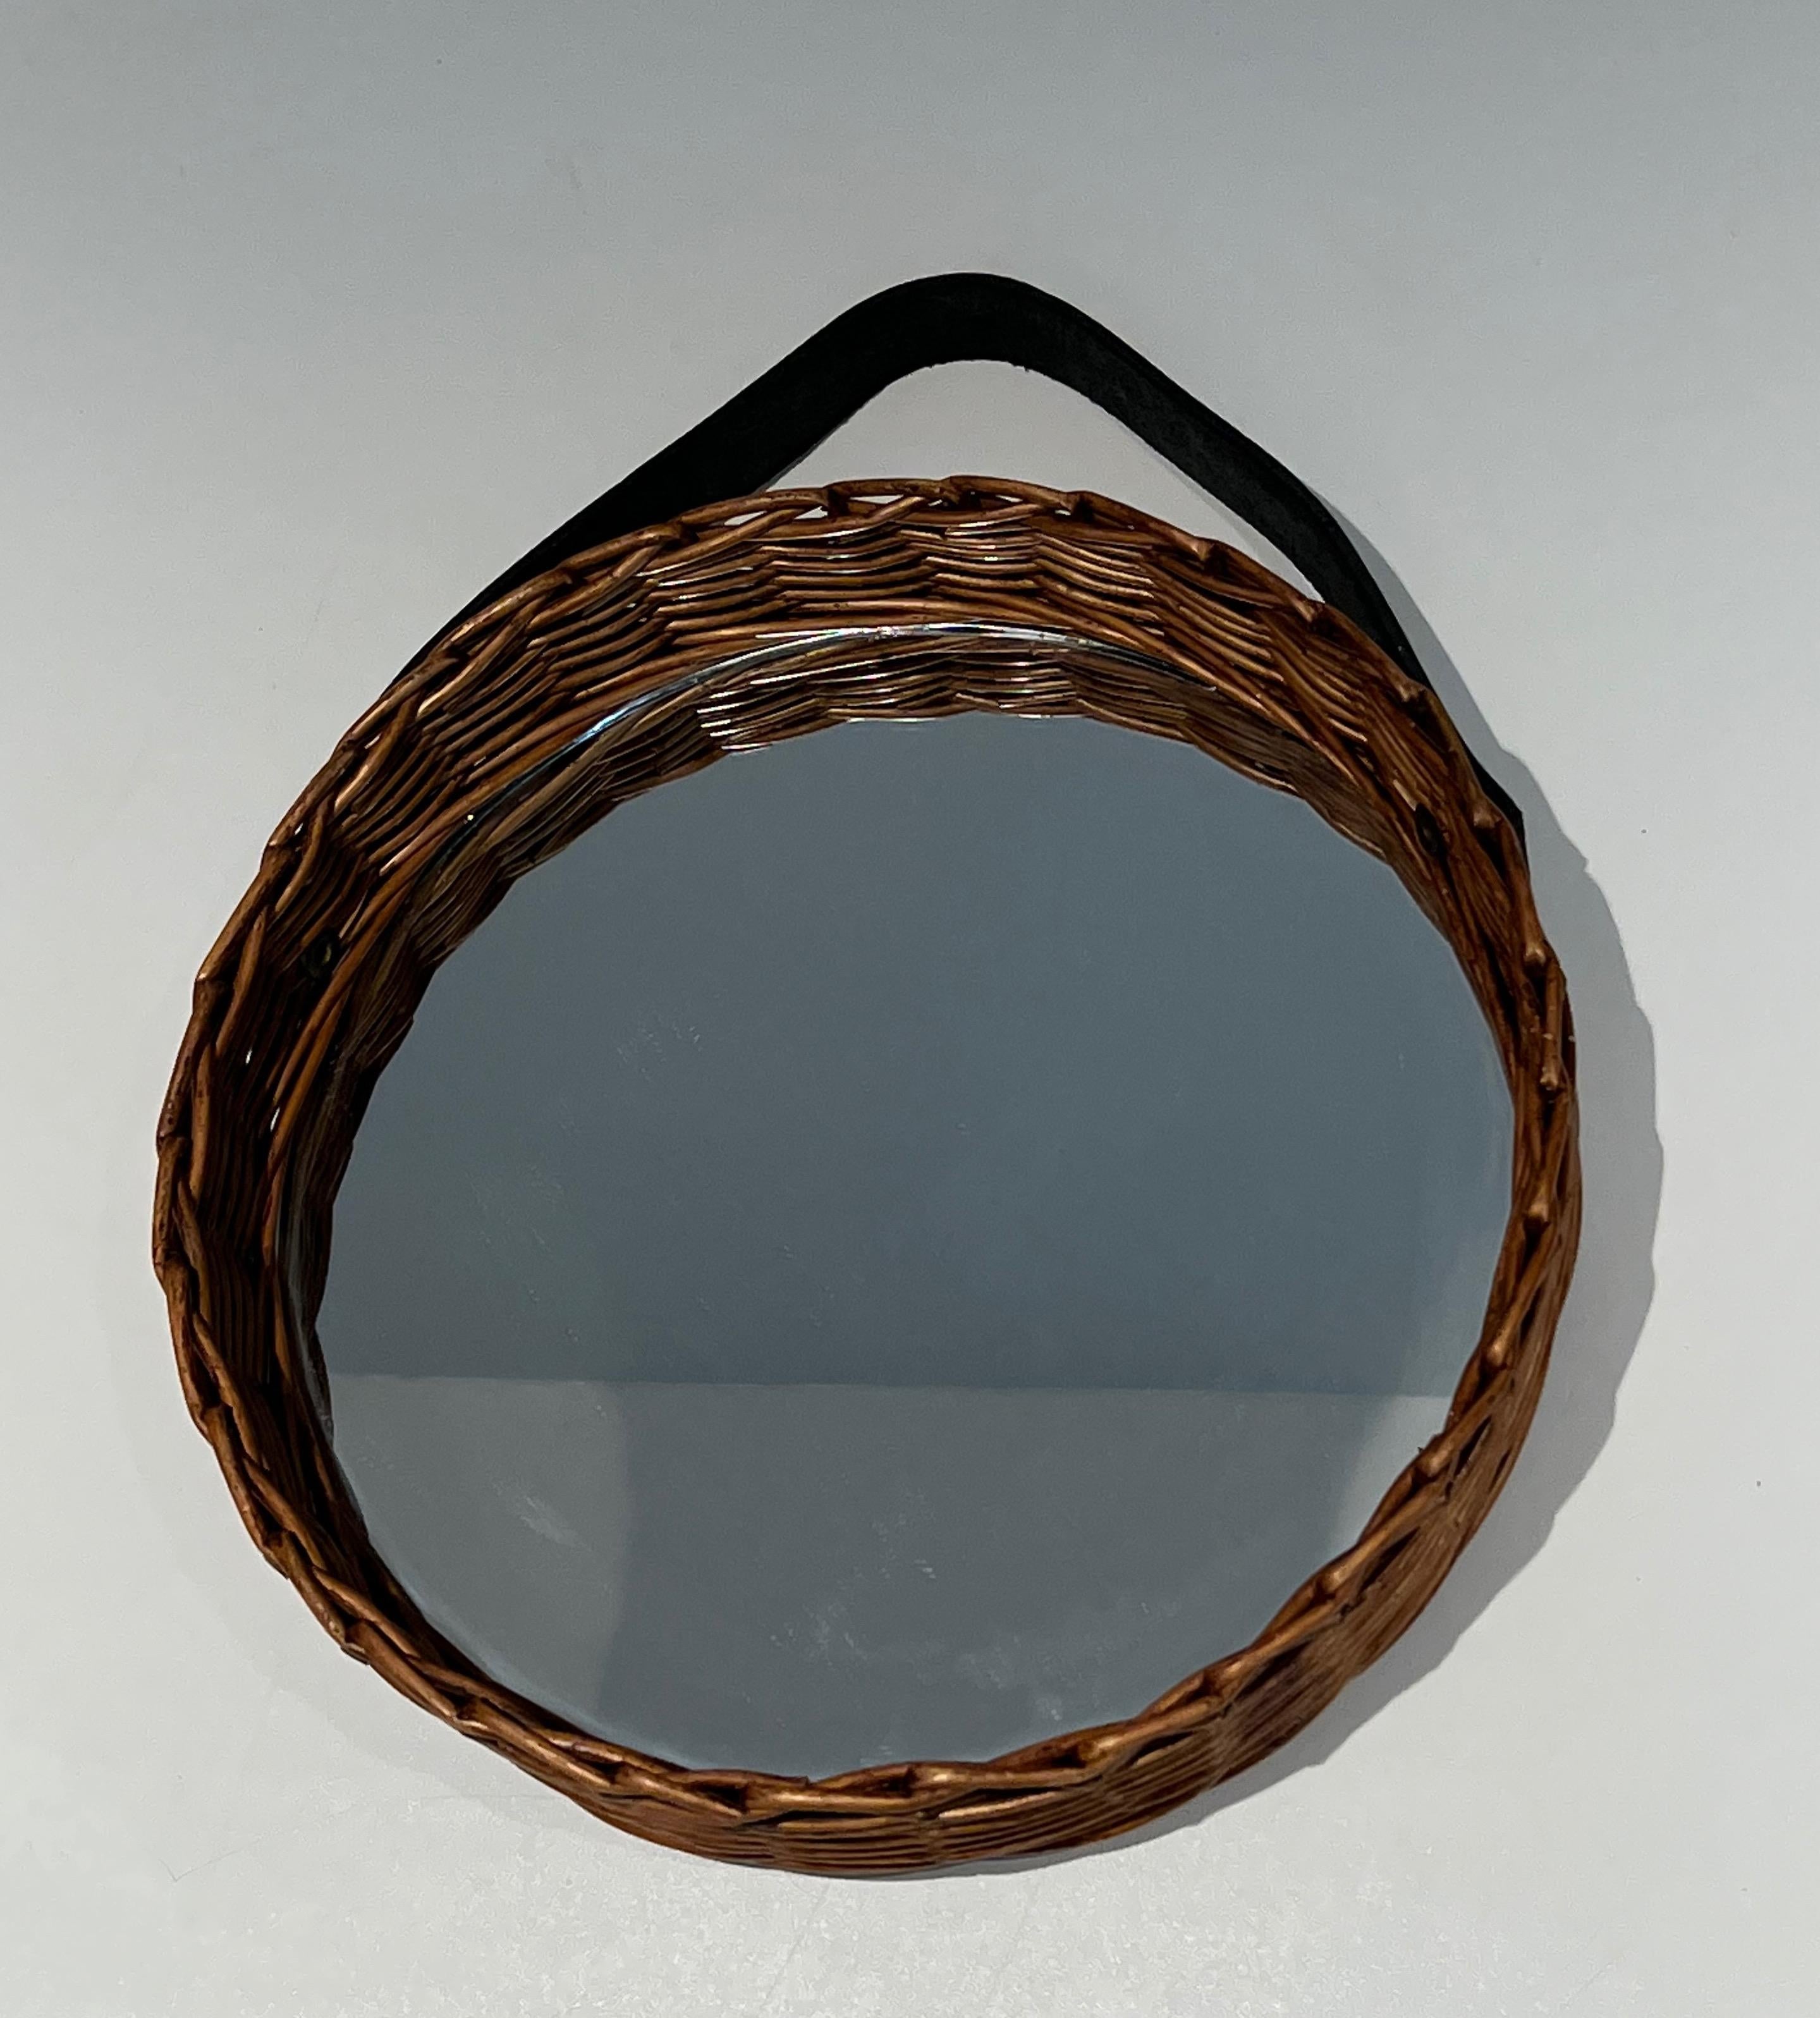 Rattan and Leather Round Mirror, French Work; circa 1950 For Sale 3